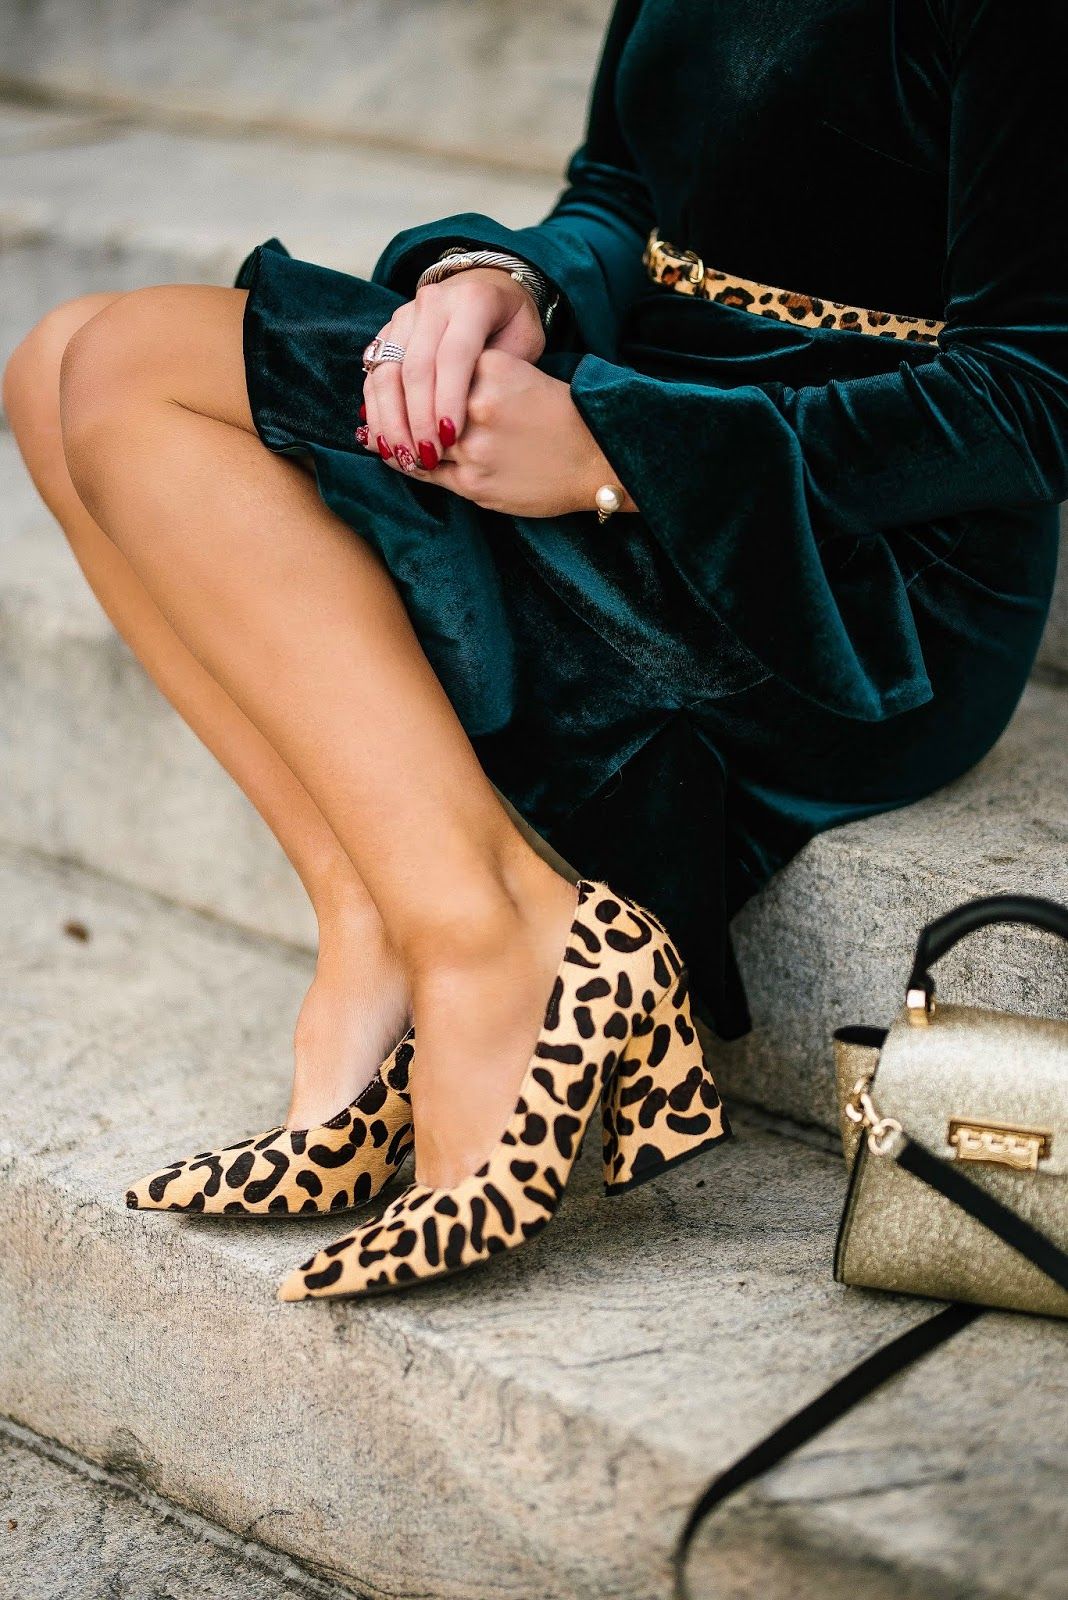 Leopard heels for girls in vogue during
winters